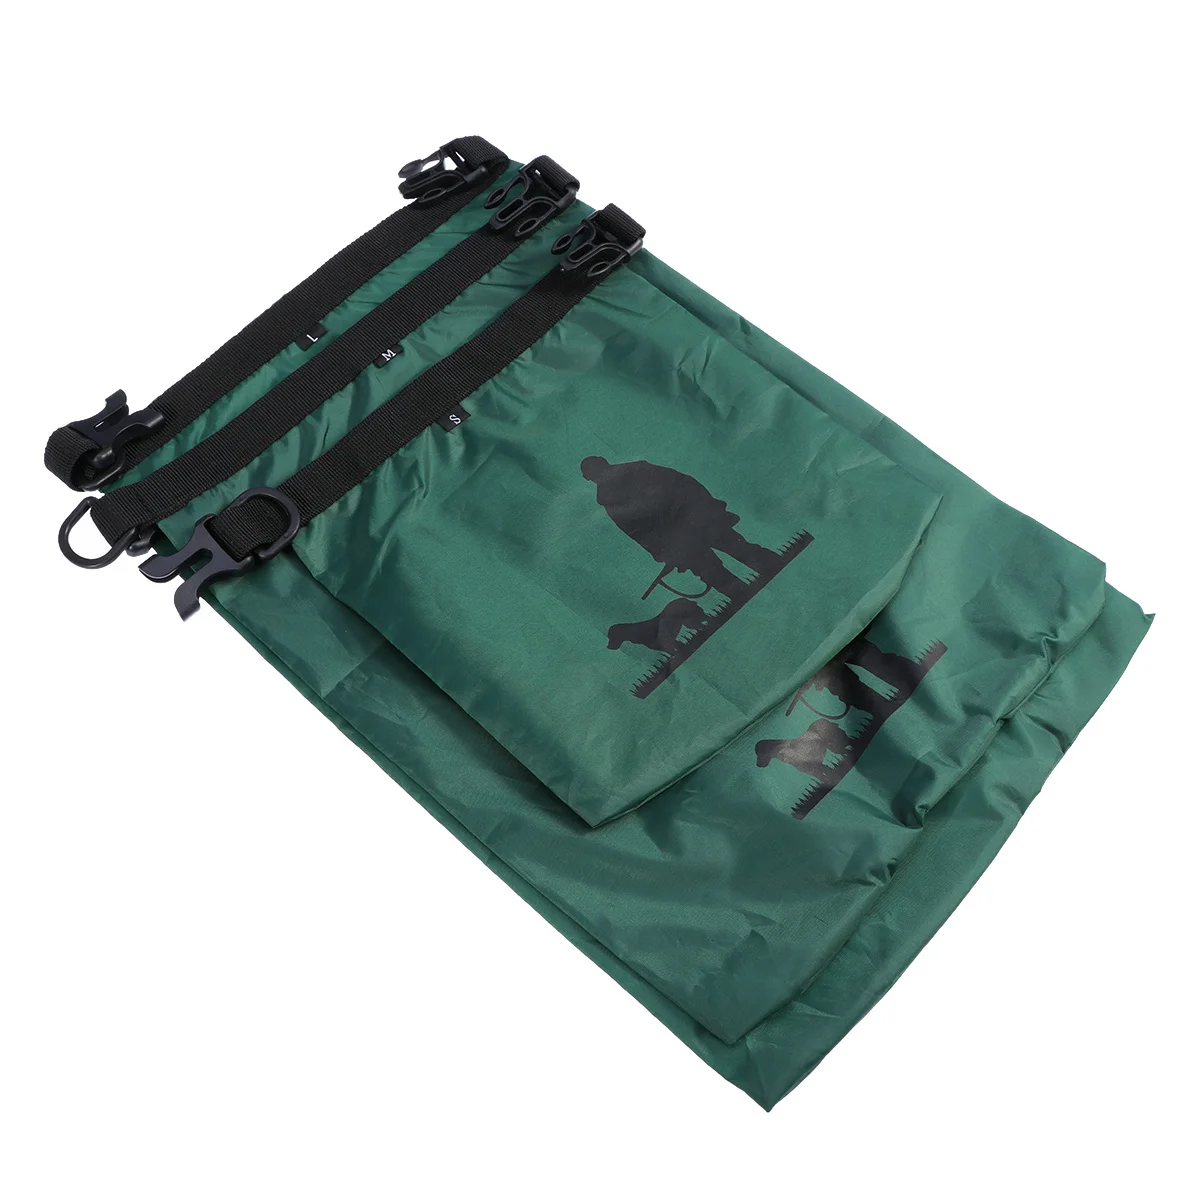 

3 Pcs Multifunction Medium and Small Dry Bag for Phone Storage Bags Boats Outdoor Waterproof Pouch